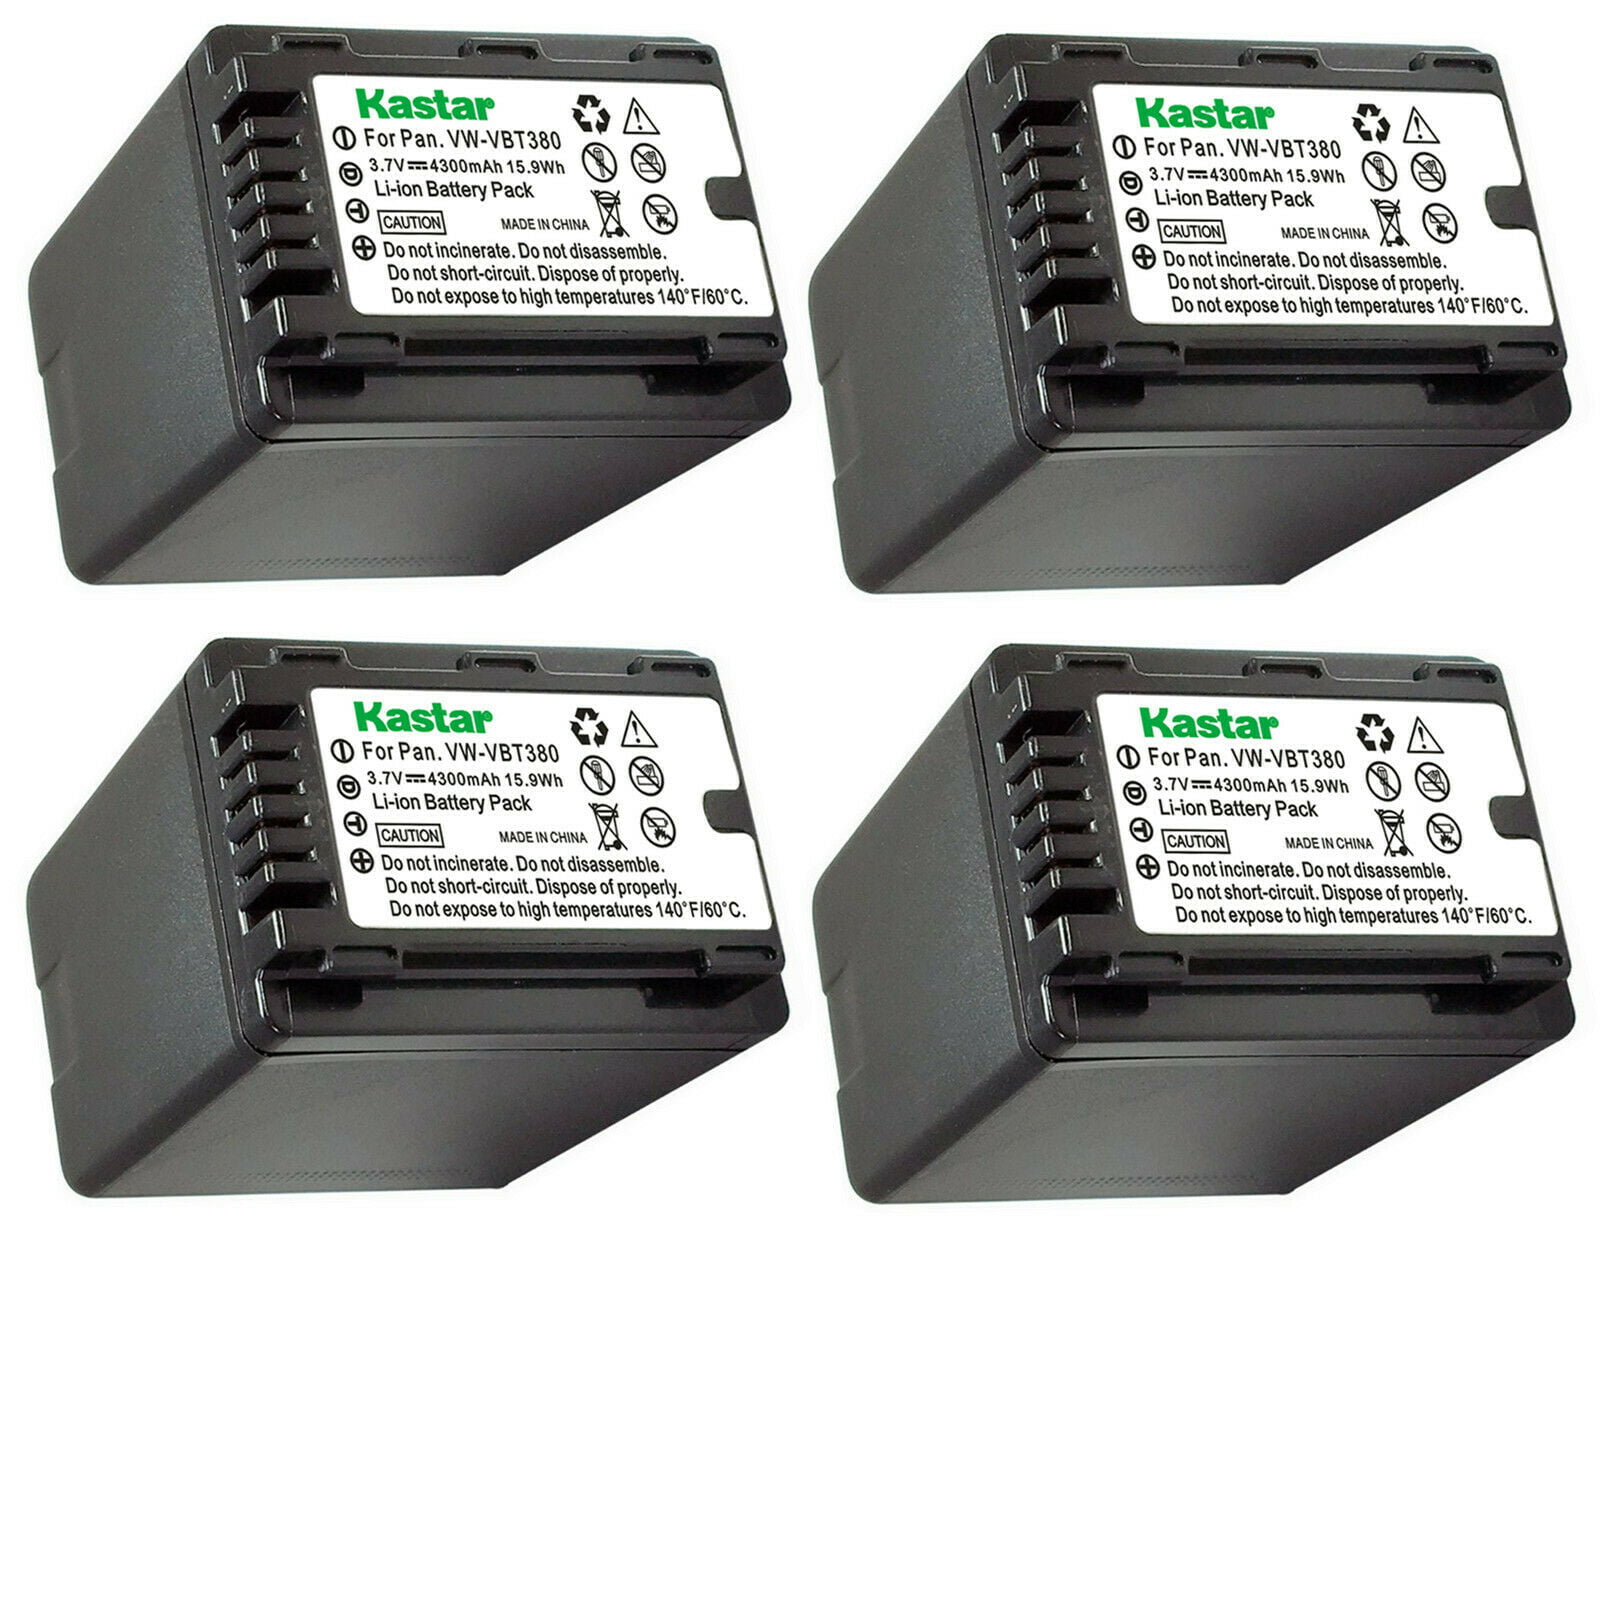 Panasonic VW-BC10 VW-BC10PP VW-PWPK Charger VW-VBT380 VW-ACT380 Battery Kastar 1-Pack VW-VBT190 Battery and LCD AC Charger Compatible with Panasonic VW-VBT190 VW-BC10-K VW-ACT190